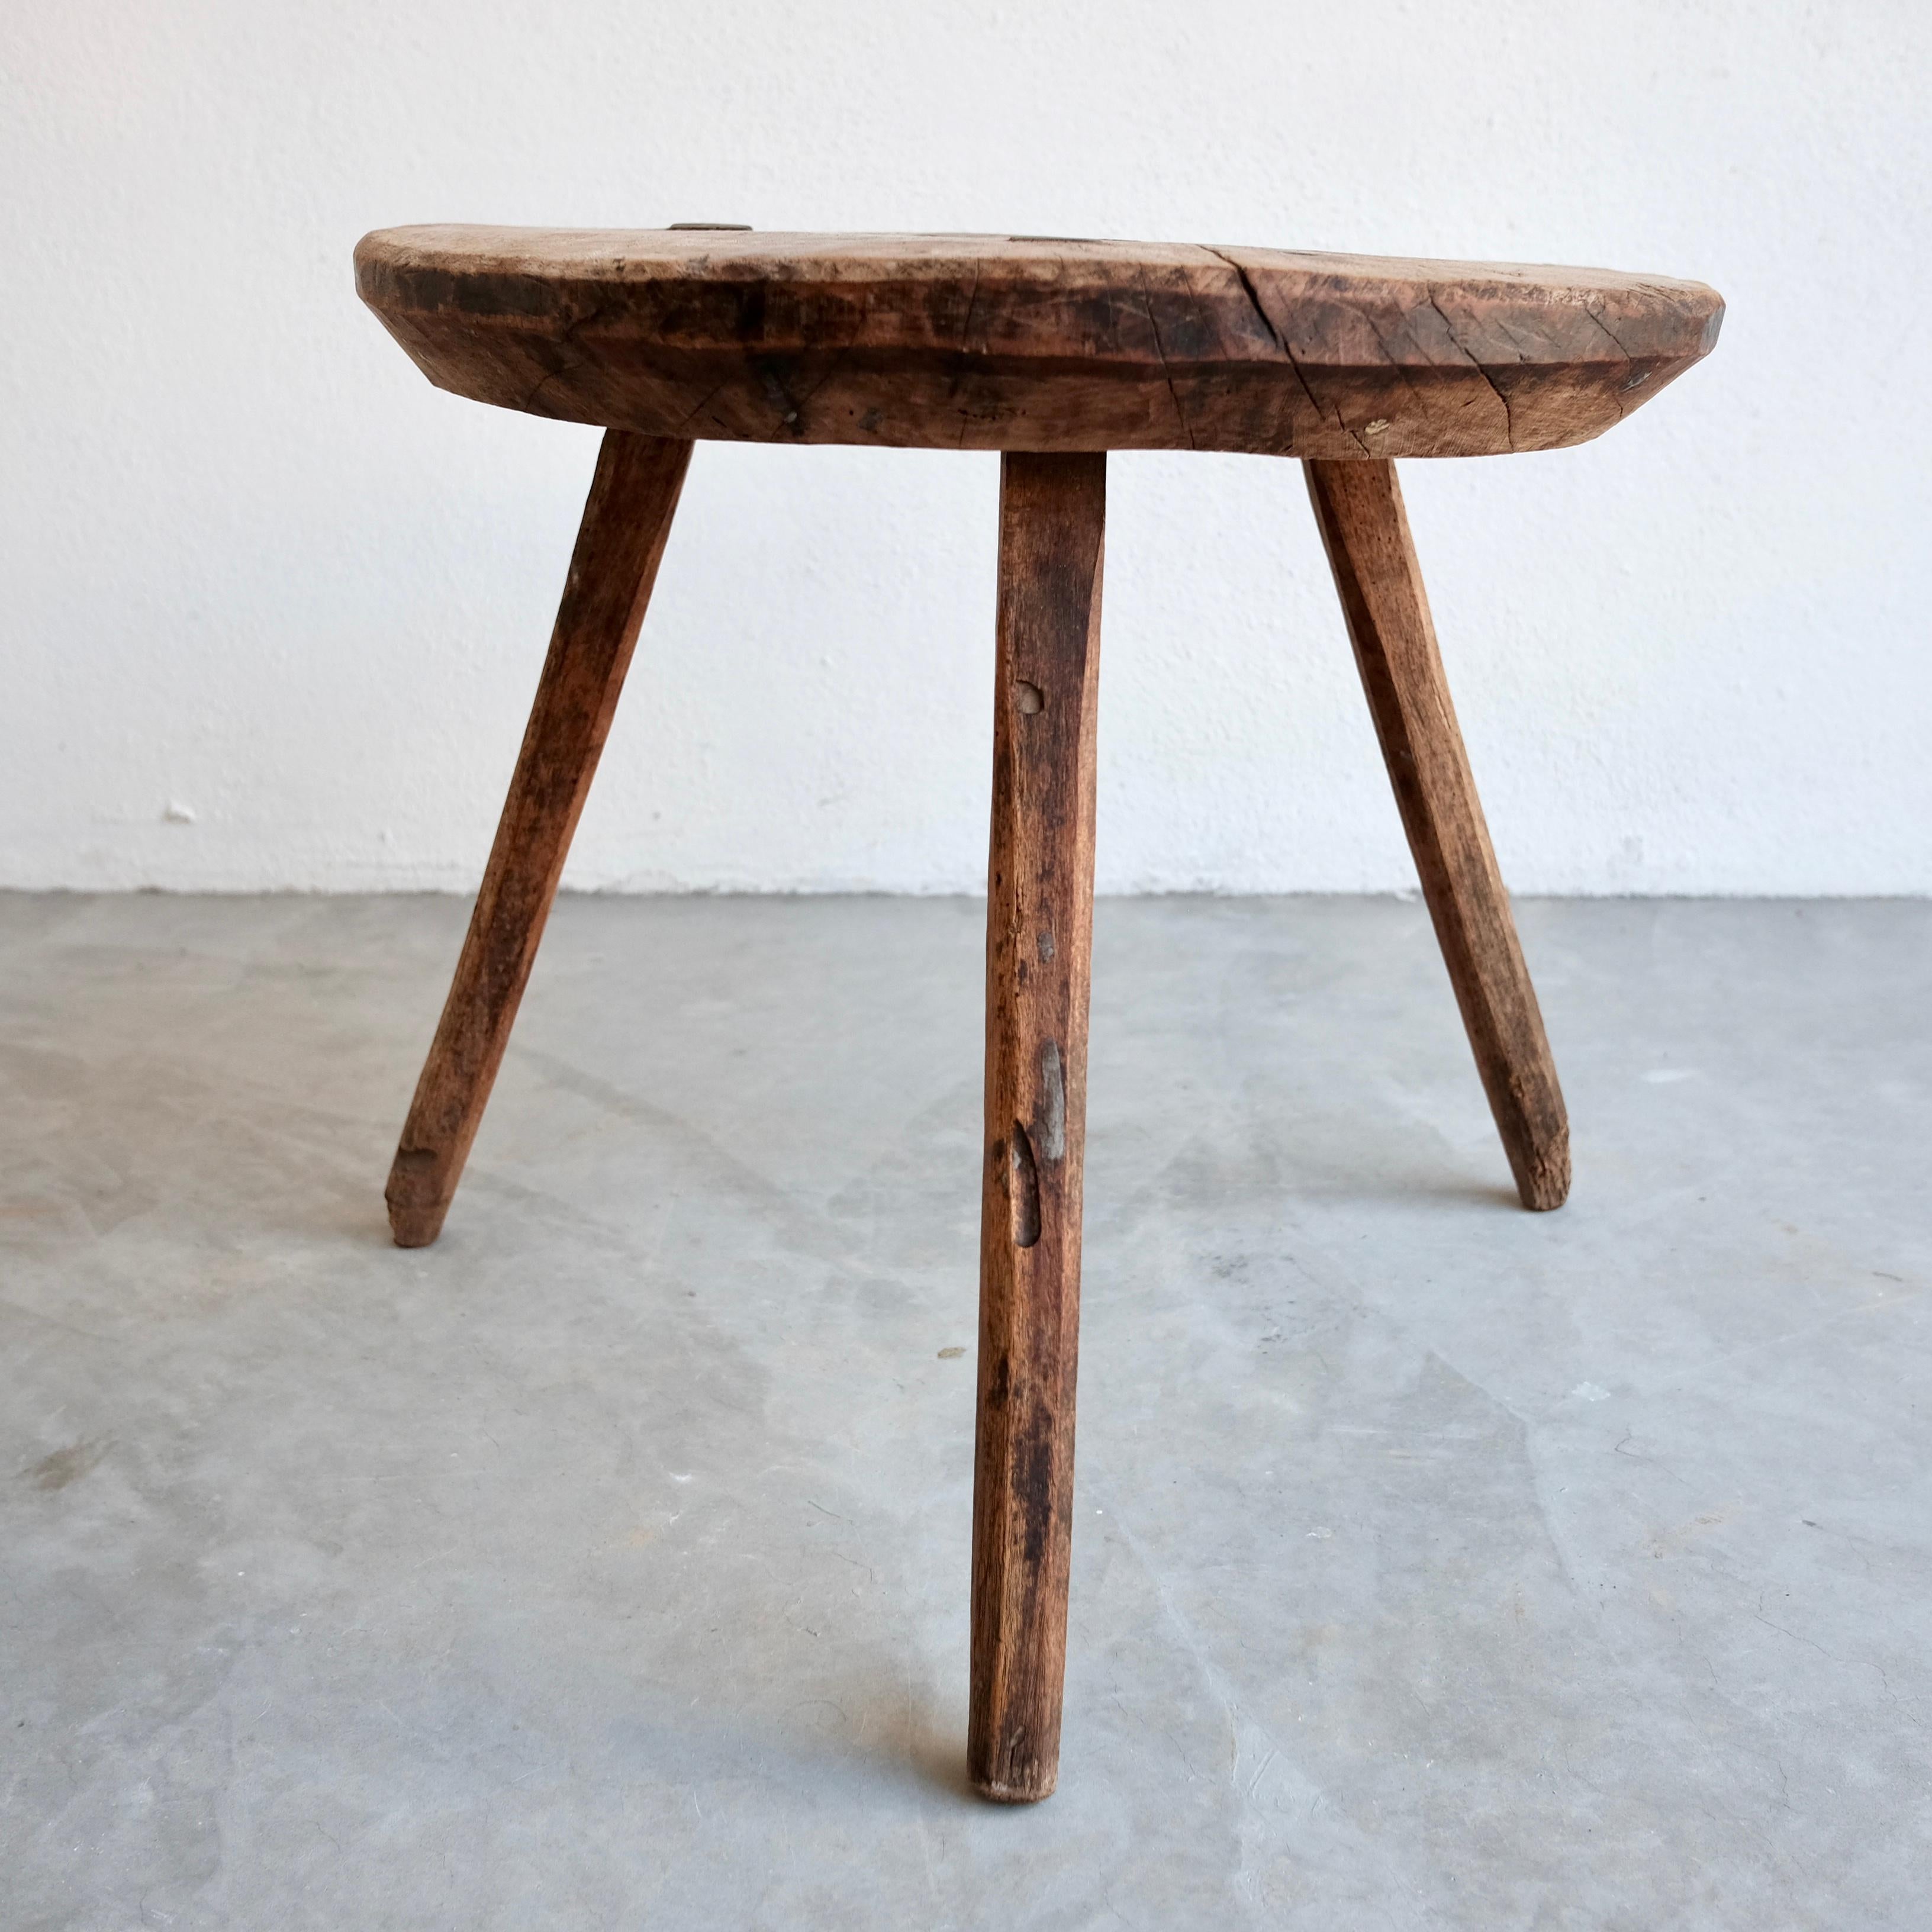 Mesquite side table from Santa Maria Del Rio, San Luis Potosi, Mexico, circa 1980s. May also be used as a stool.